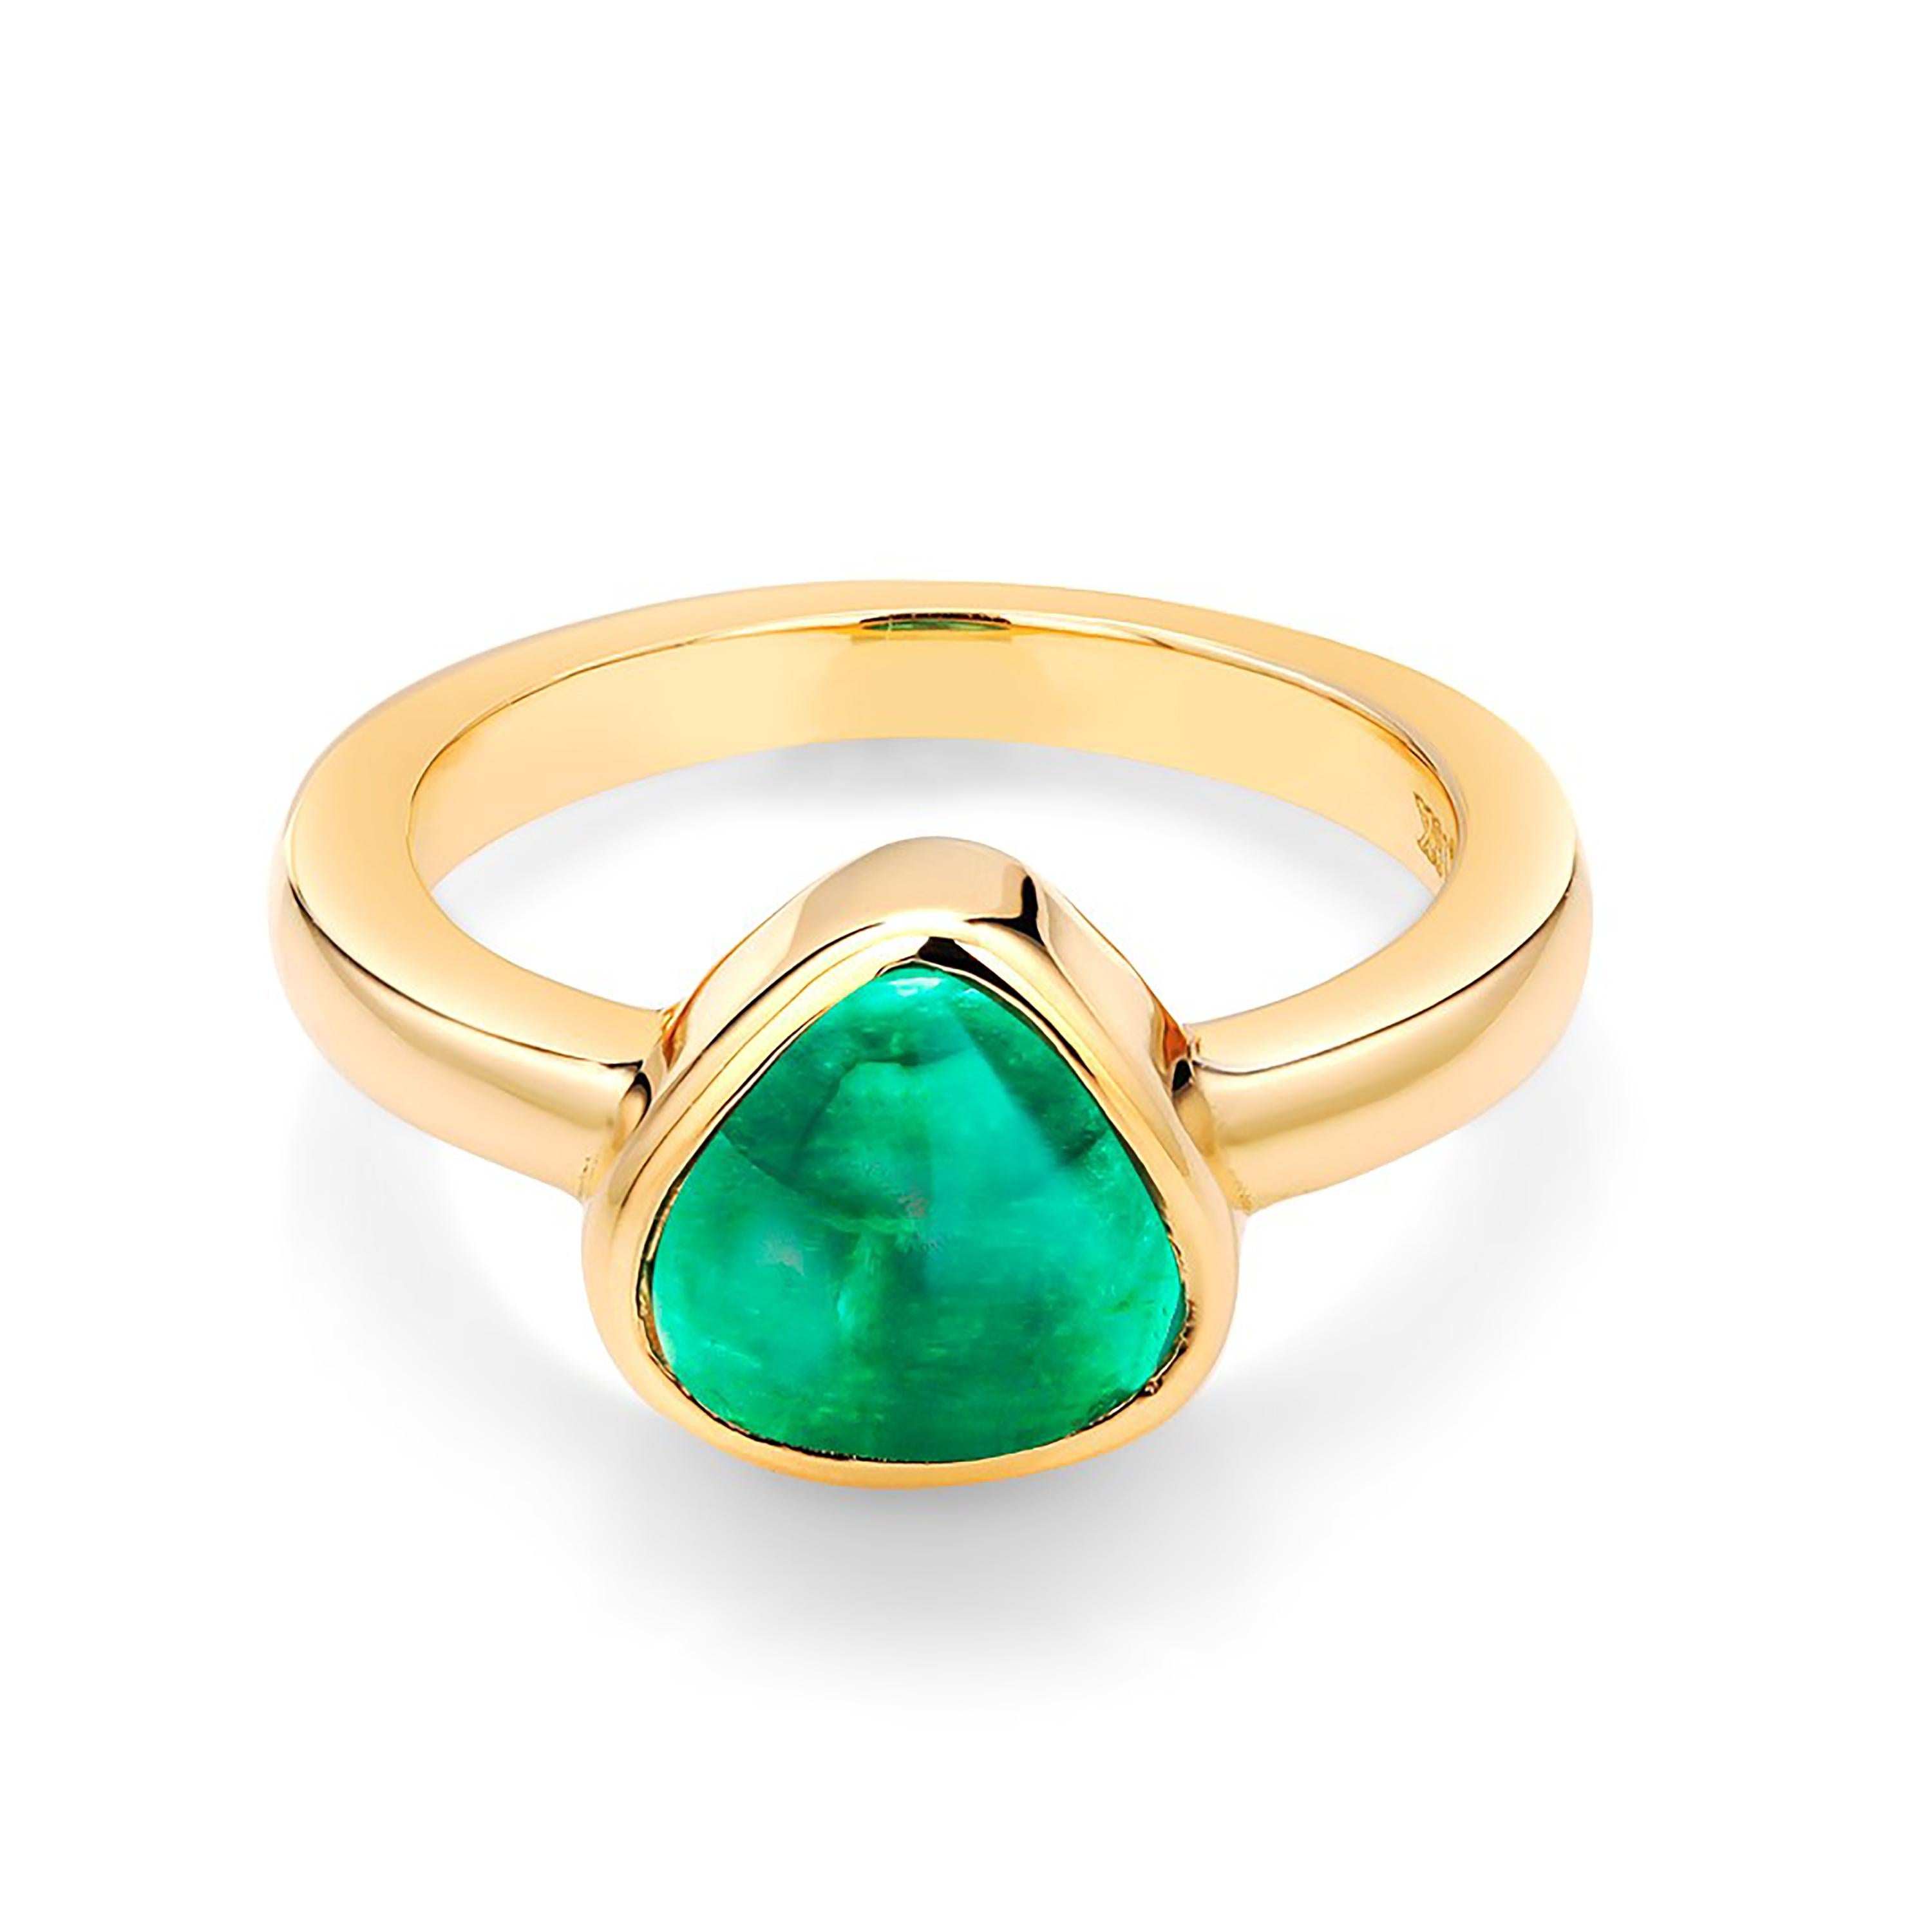 Eighteen karats yellow gold raised bezel dome cocktail ring
Trillion Colombia cabochon green emerald weighing 2.10 carats
Emerald hue color: grass green tone                                                               
Ring size 6 In Stock
The